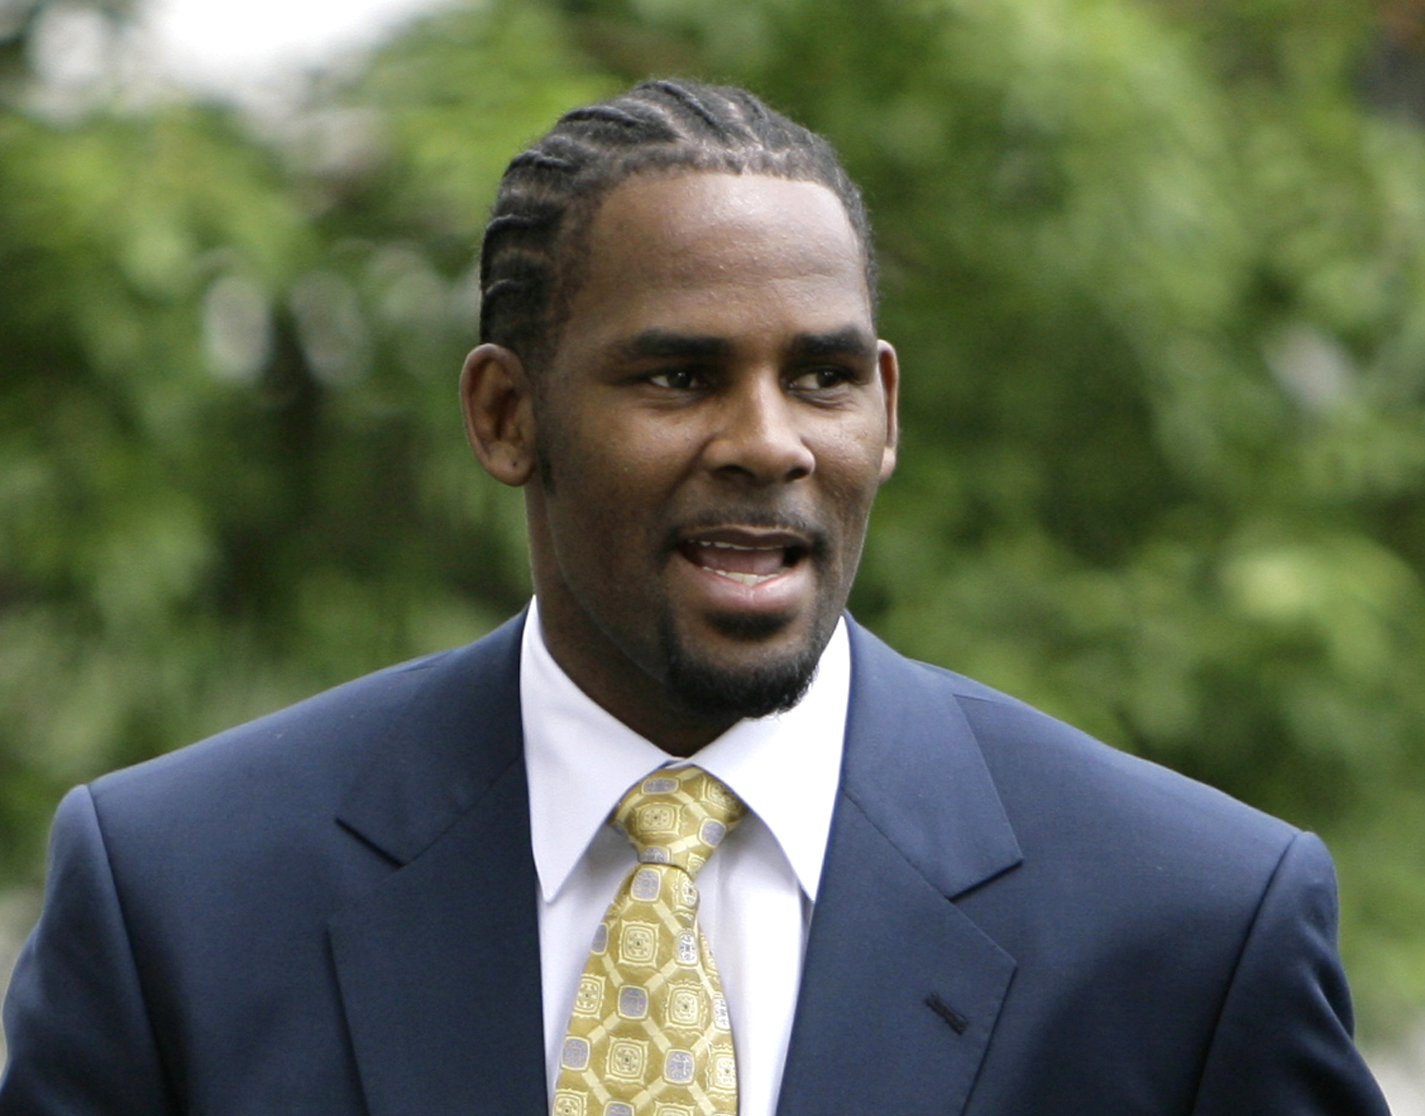 R. Kelly never had to register as a sex offender, but we still had to include his highly publicized celebrity sex scandal on our list. Unless you were living under a rock in 2003, surely you can recall the incident: Kelly made headlines after he was arrested and indicted on 21 counts of child pornography, which were later reduced to 14 counts.